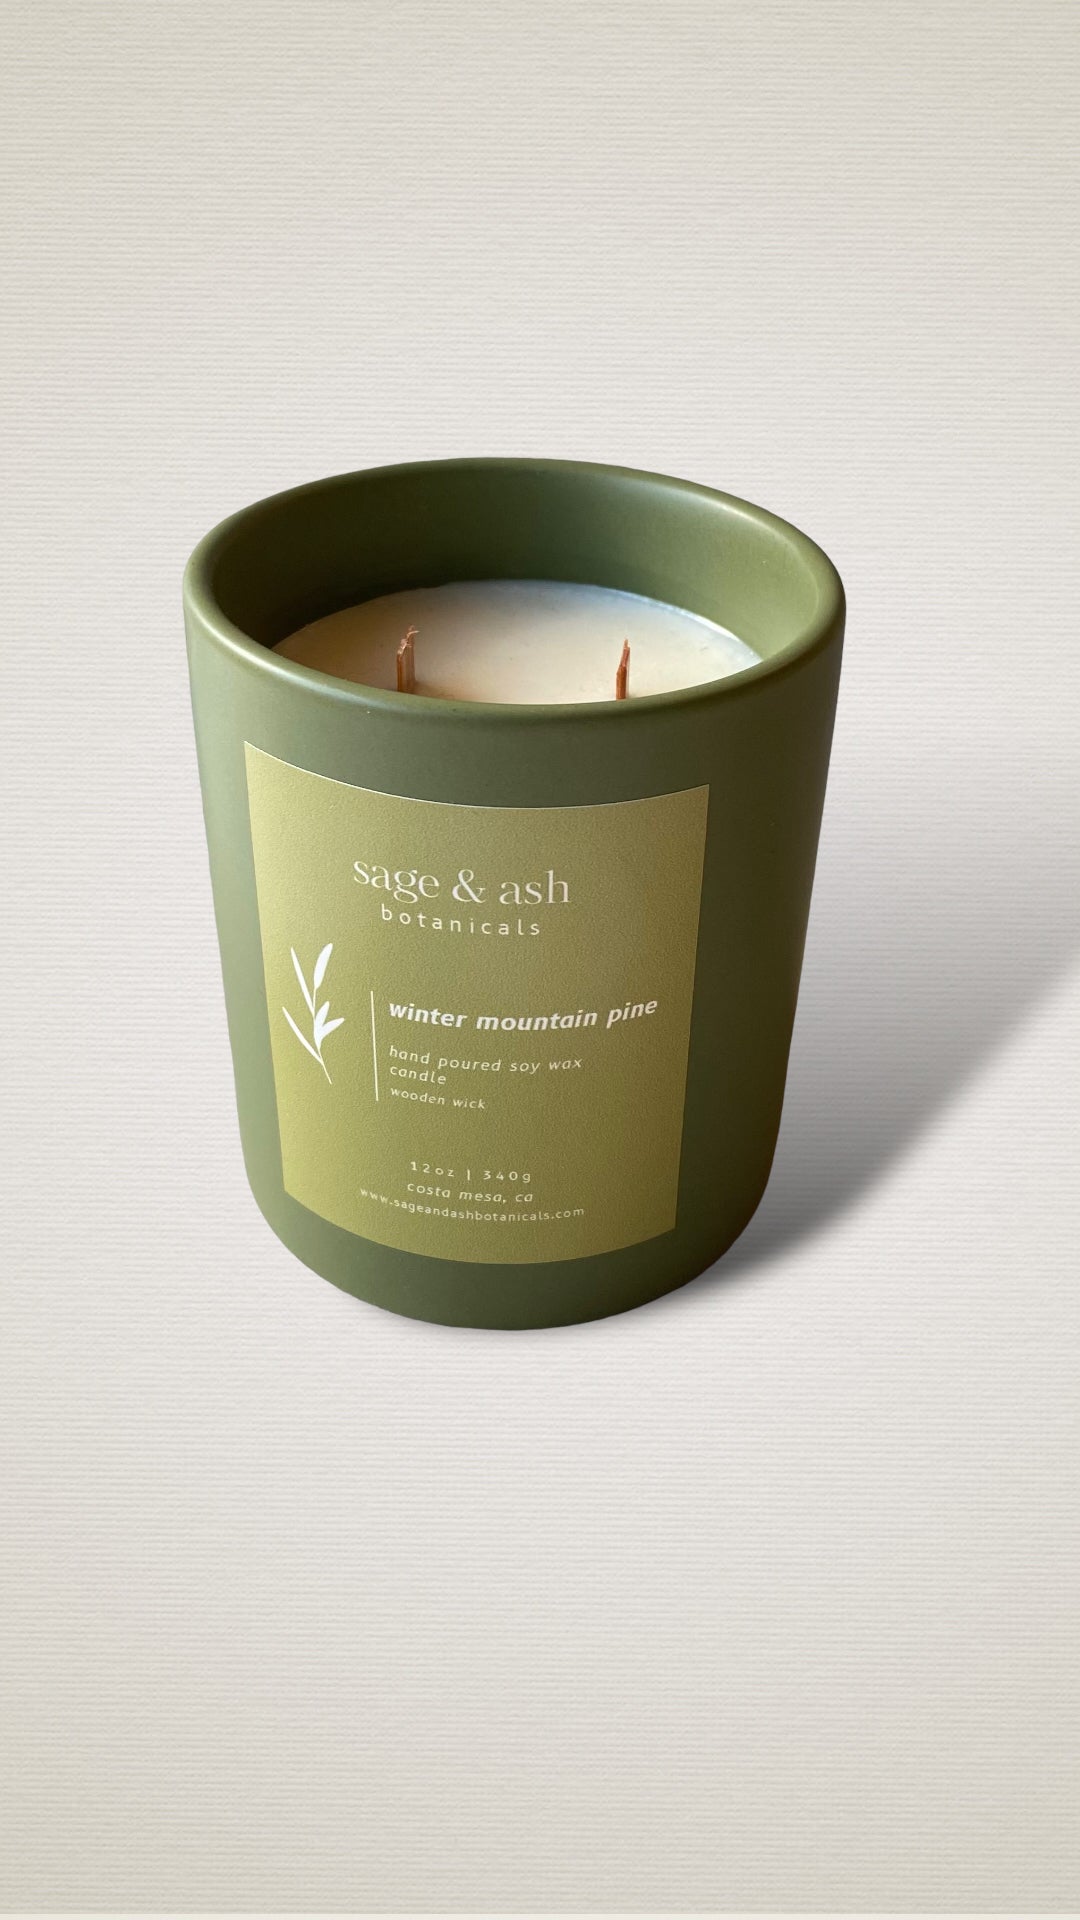 Winter Mountain Pine 12oz Ceramic Tumbler Candle Soy Wax Classic Colle –  sage & ash botanicals candle co